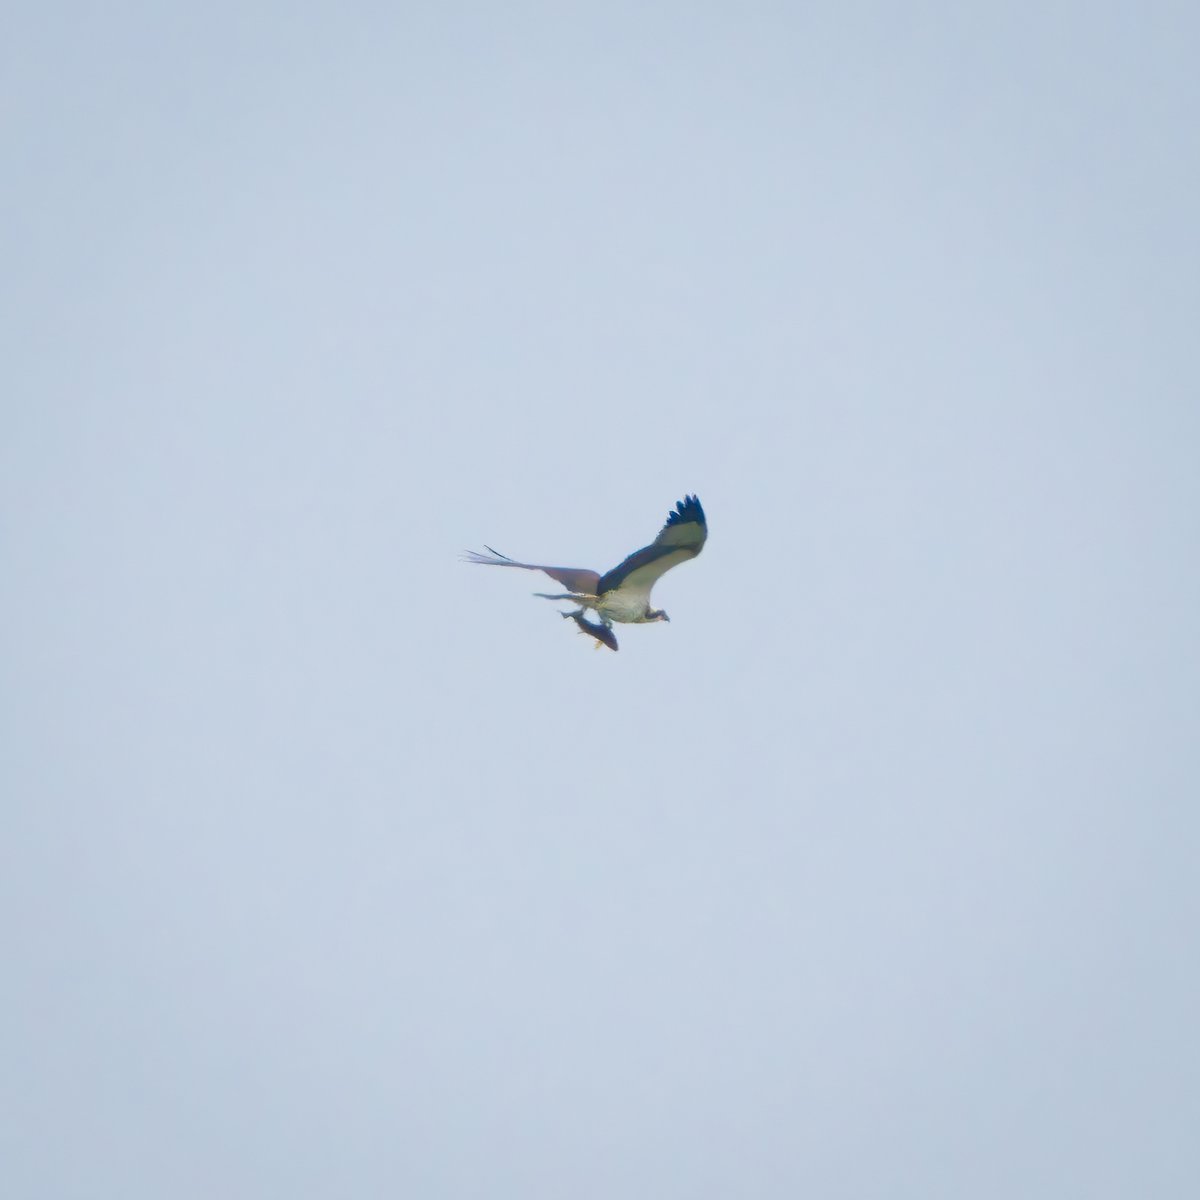 An osprey spotted over Llyn Coron, Anglesey, by our extremely observant and lovely neighbour, @Jennyontheboat, who popped by to tip us off about the sighting. Photographed at extreme range as it fled the scene of the crime, having poached a nice trout for breakfast! 😊👍